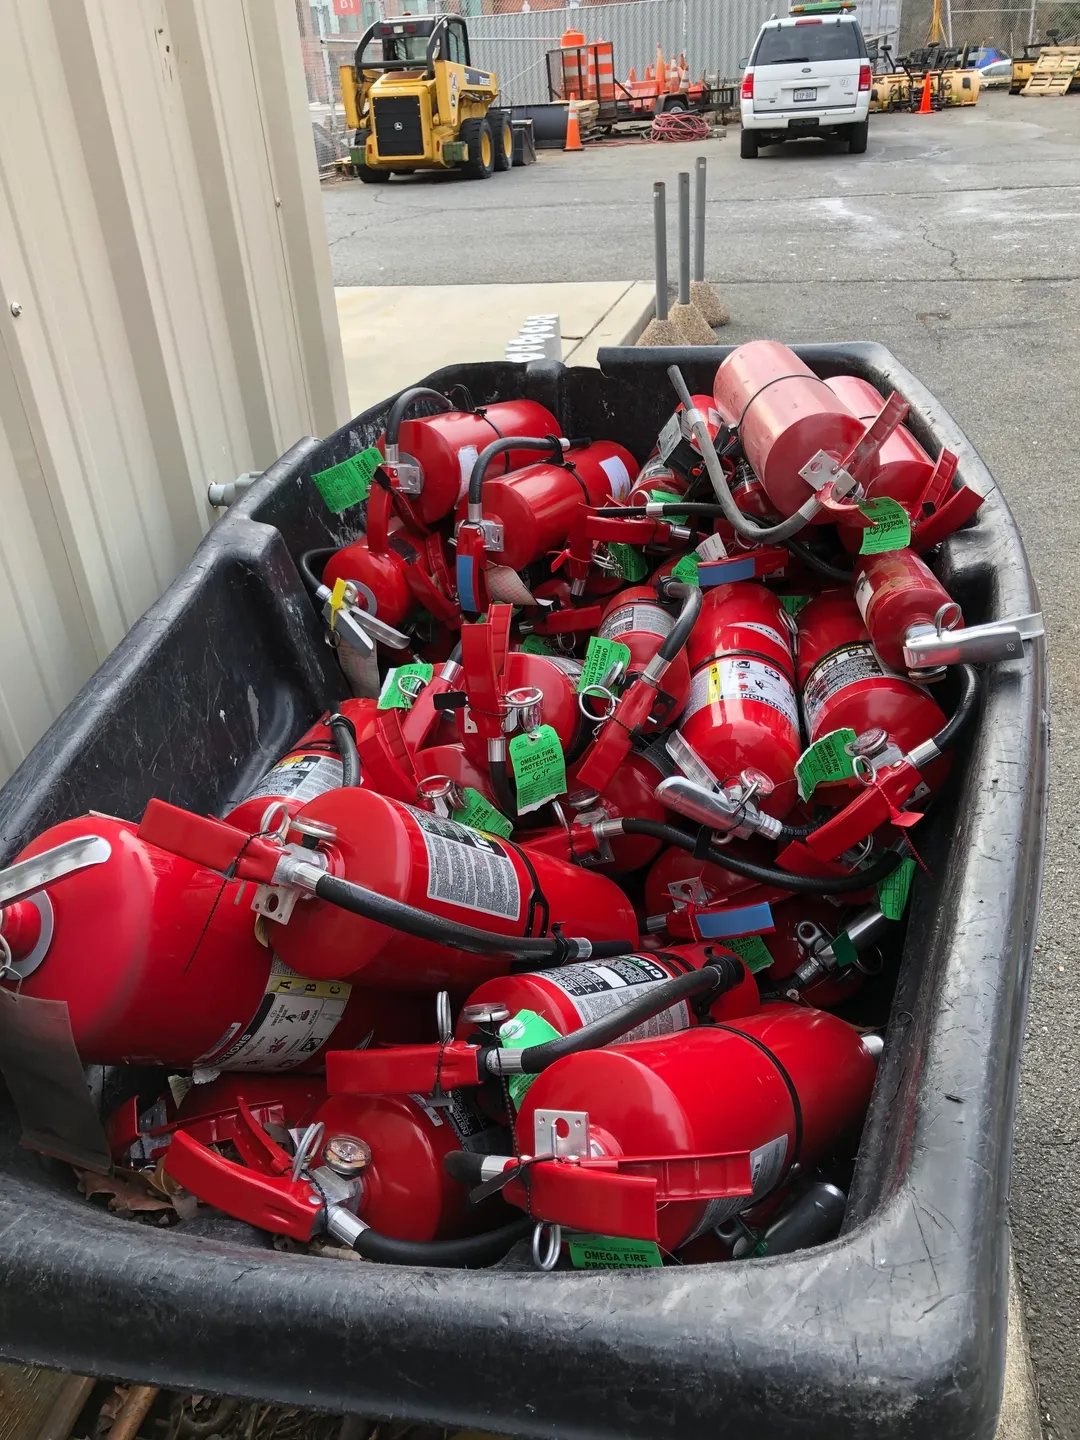 A large black bin full of red fire extinguishers.